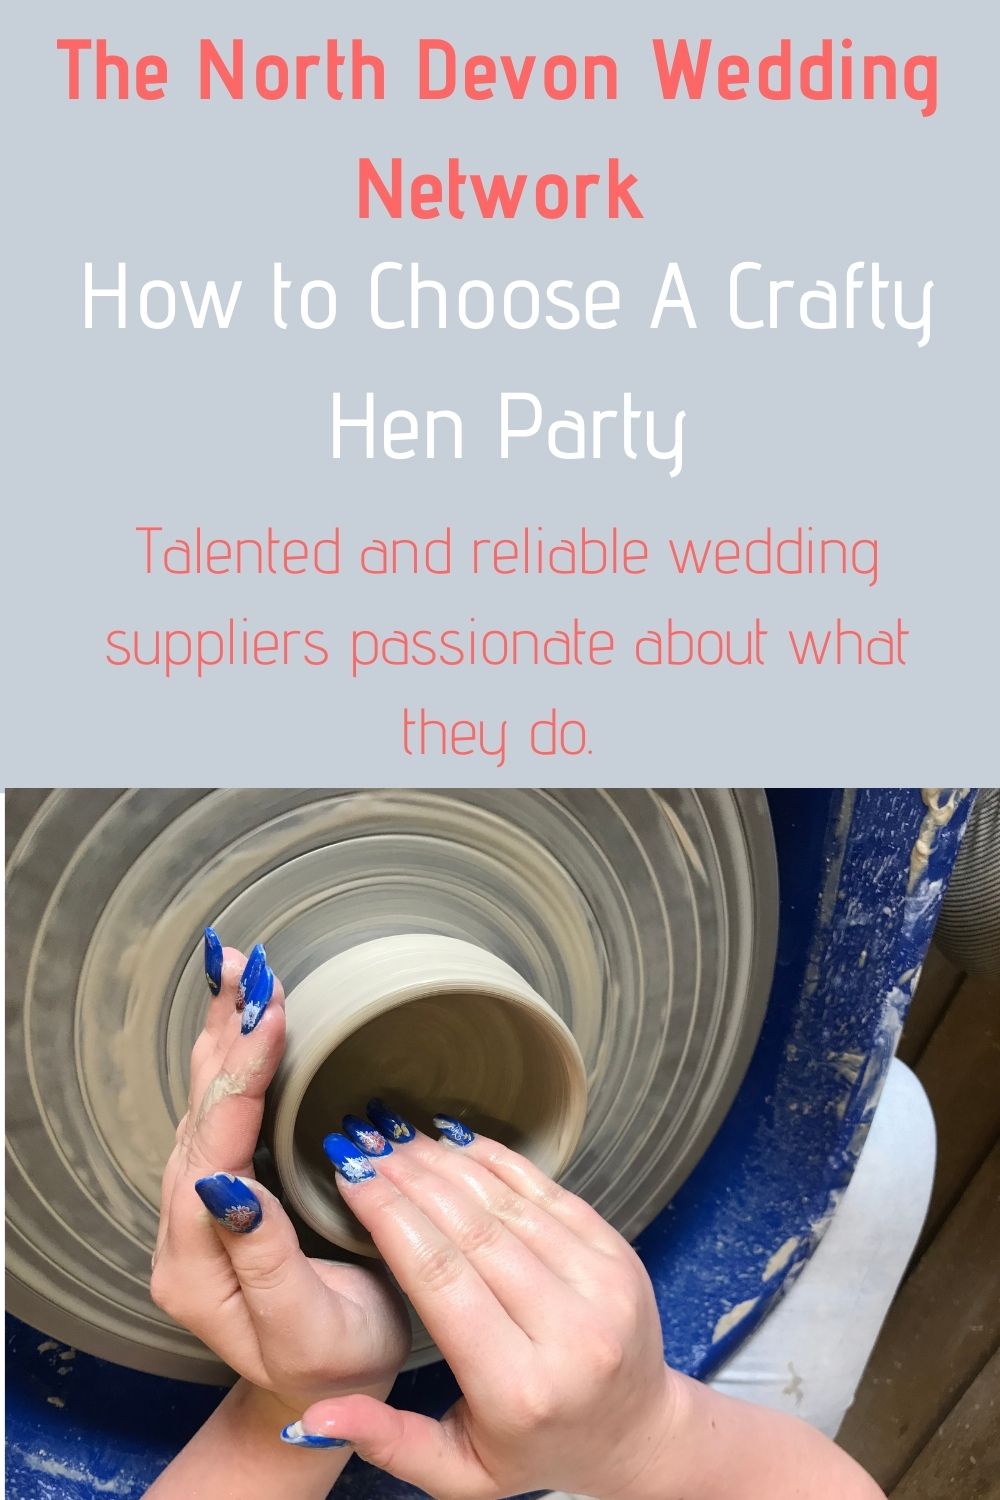 How to choose a crafty hen party